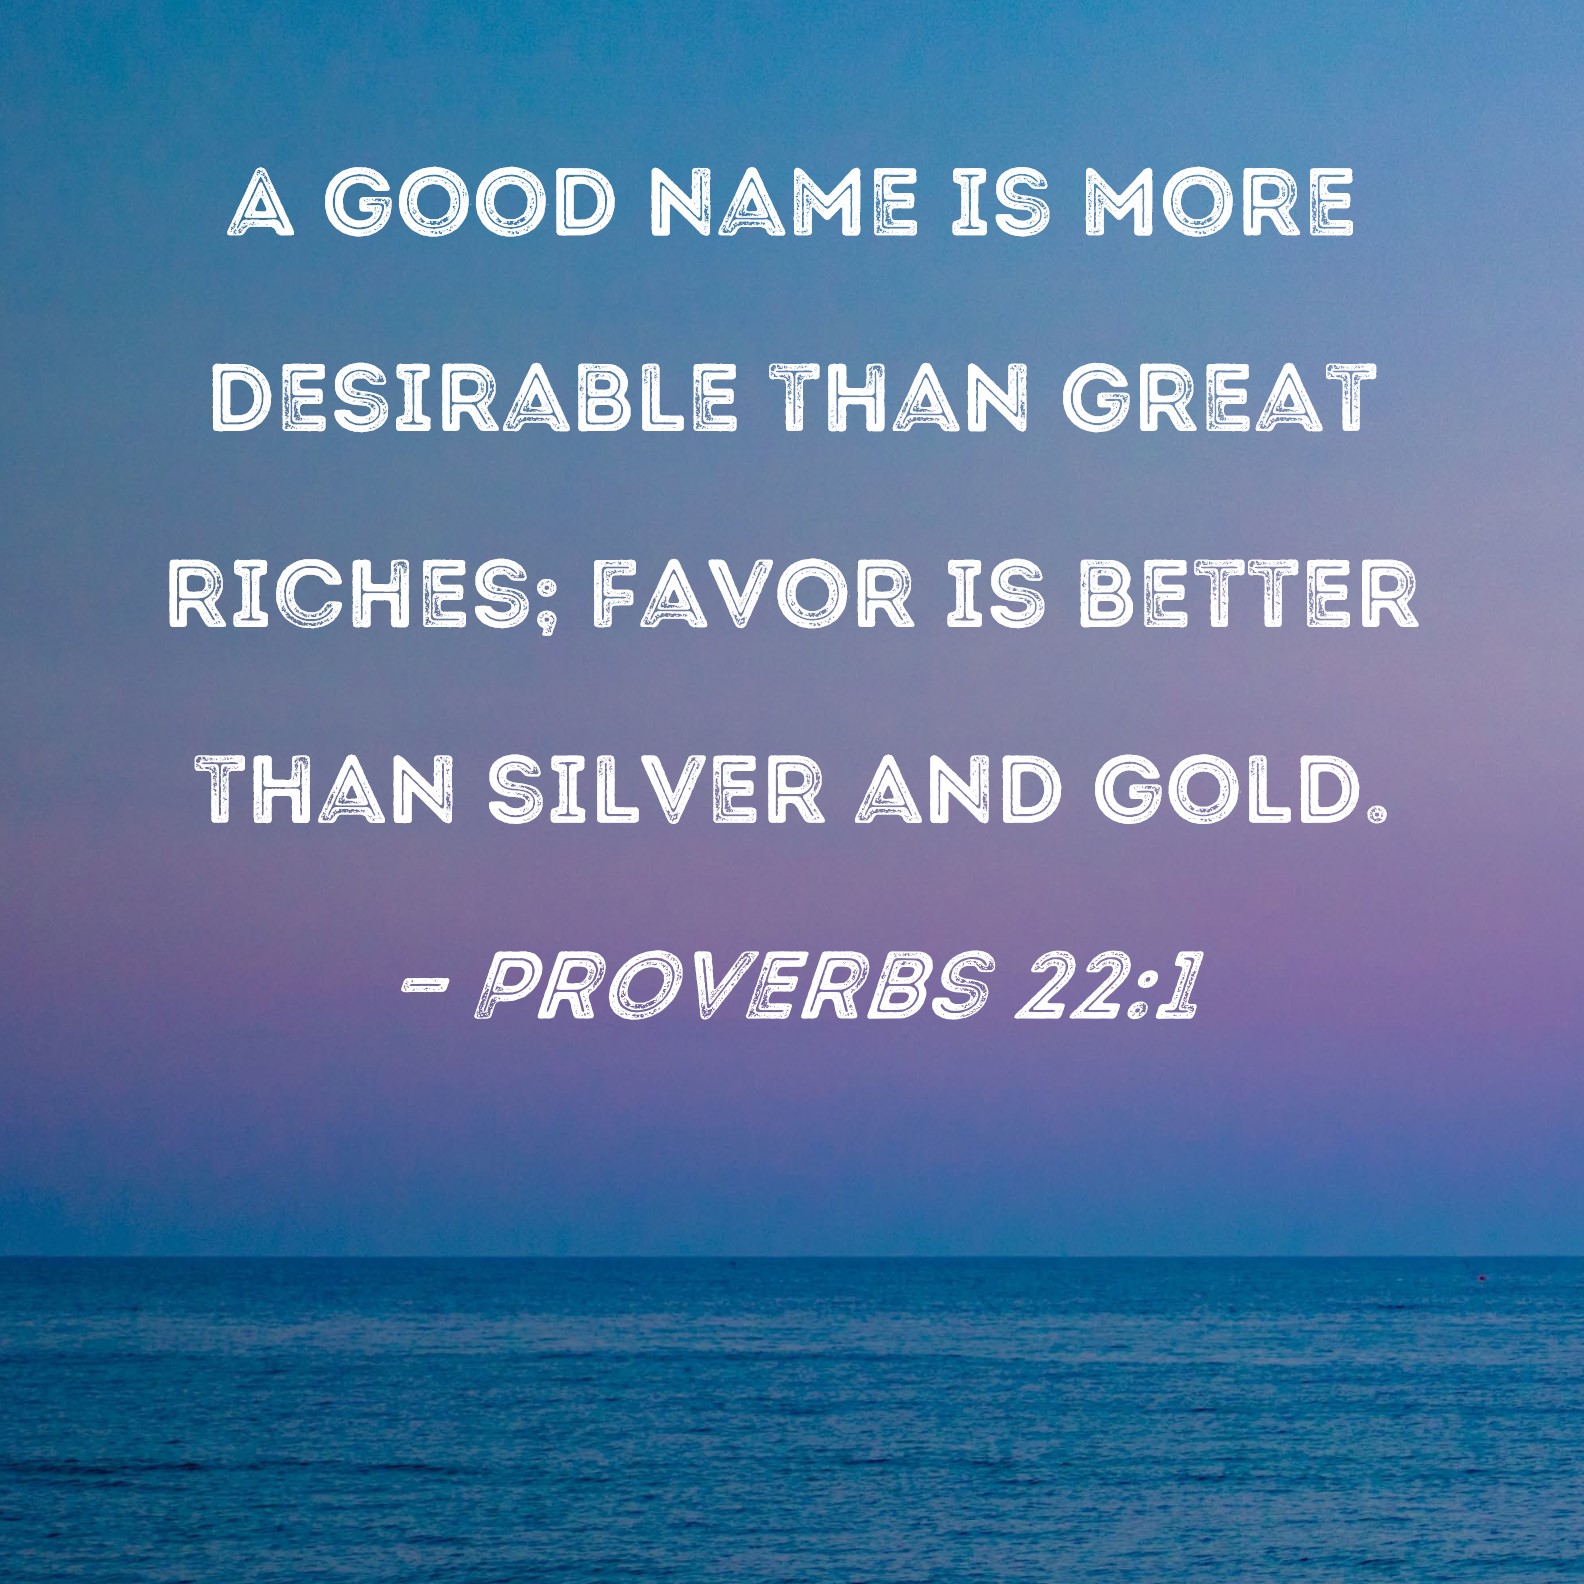 Proverbs 22:1 A good name is more desirable than great riches ...